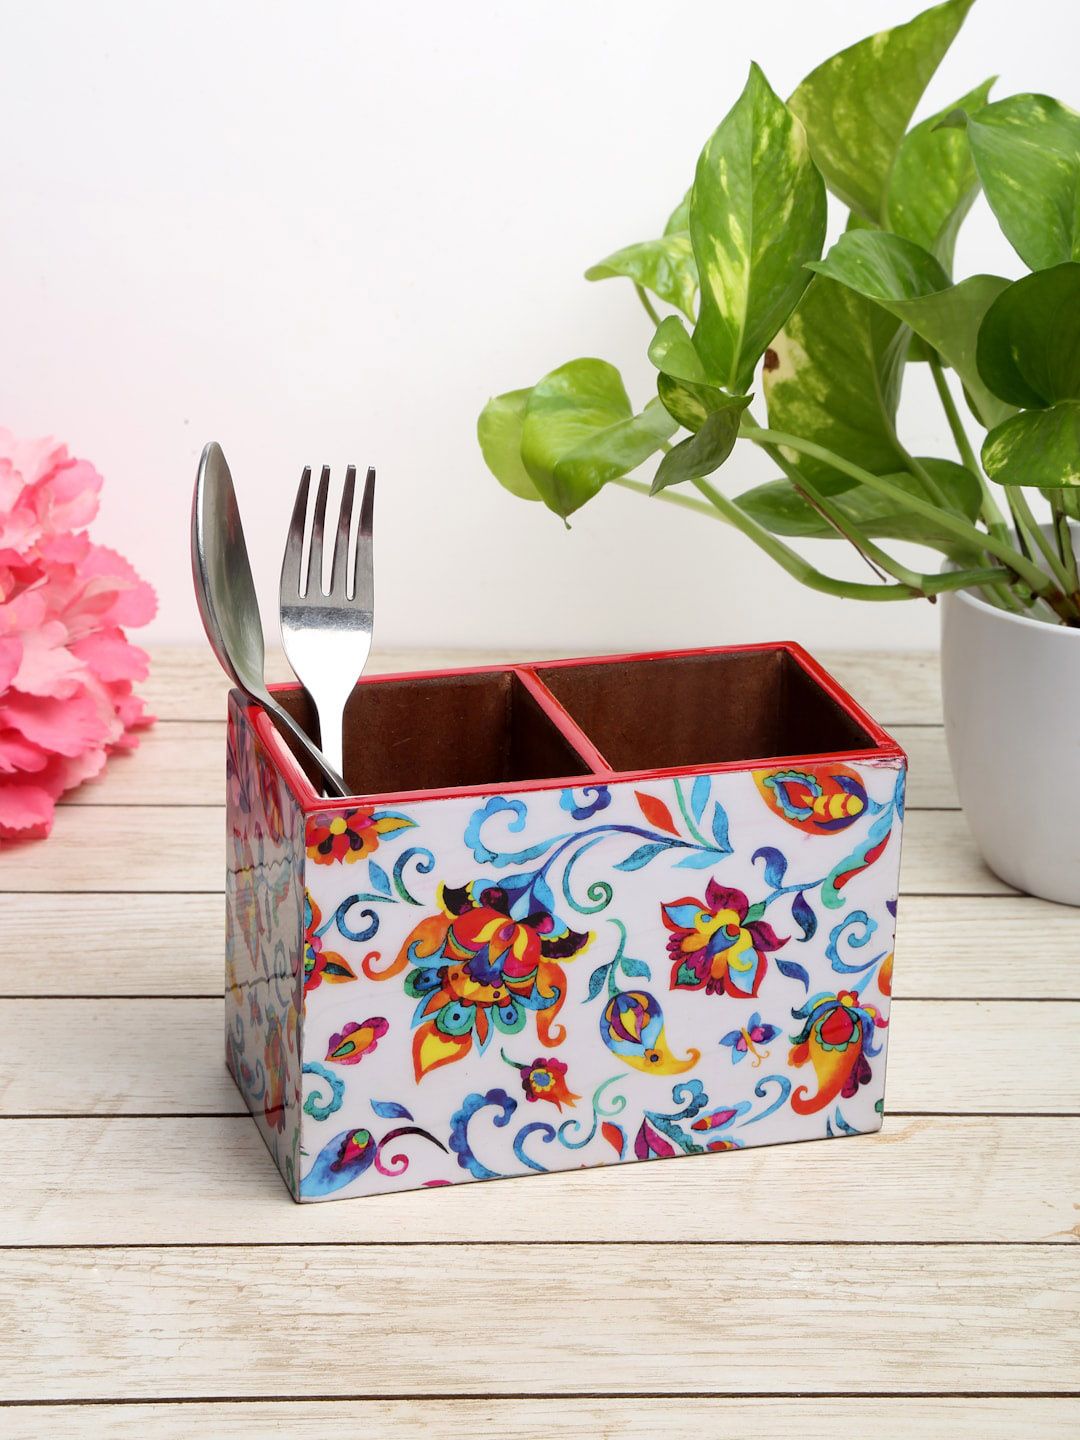 ROMEE White & Blue Printed Cutlery Holder With 2 Compartment Price in India